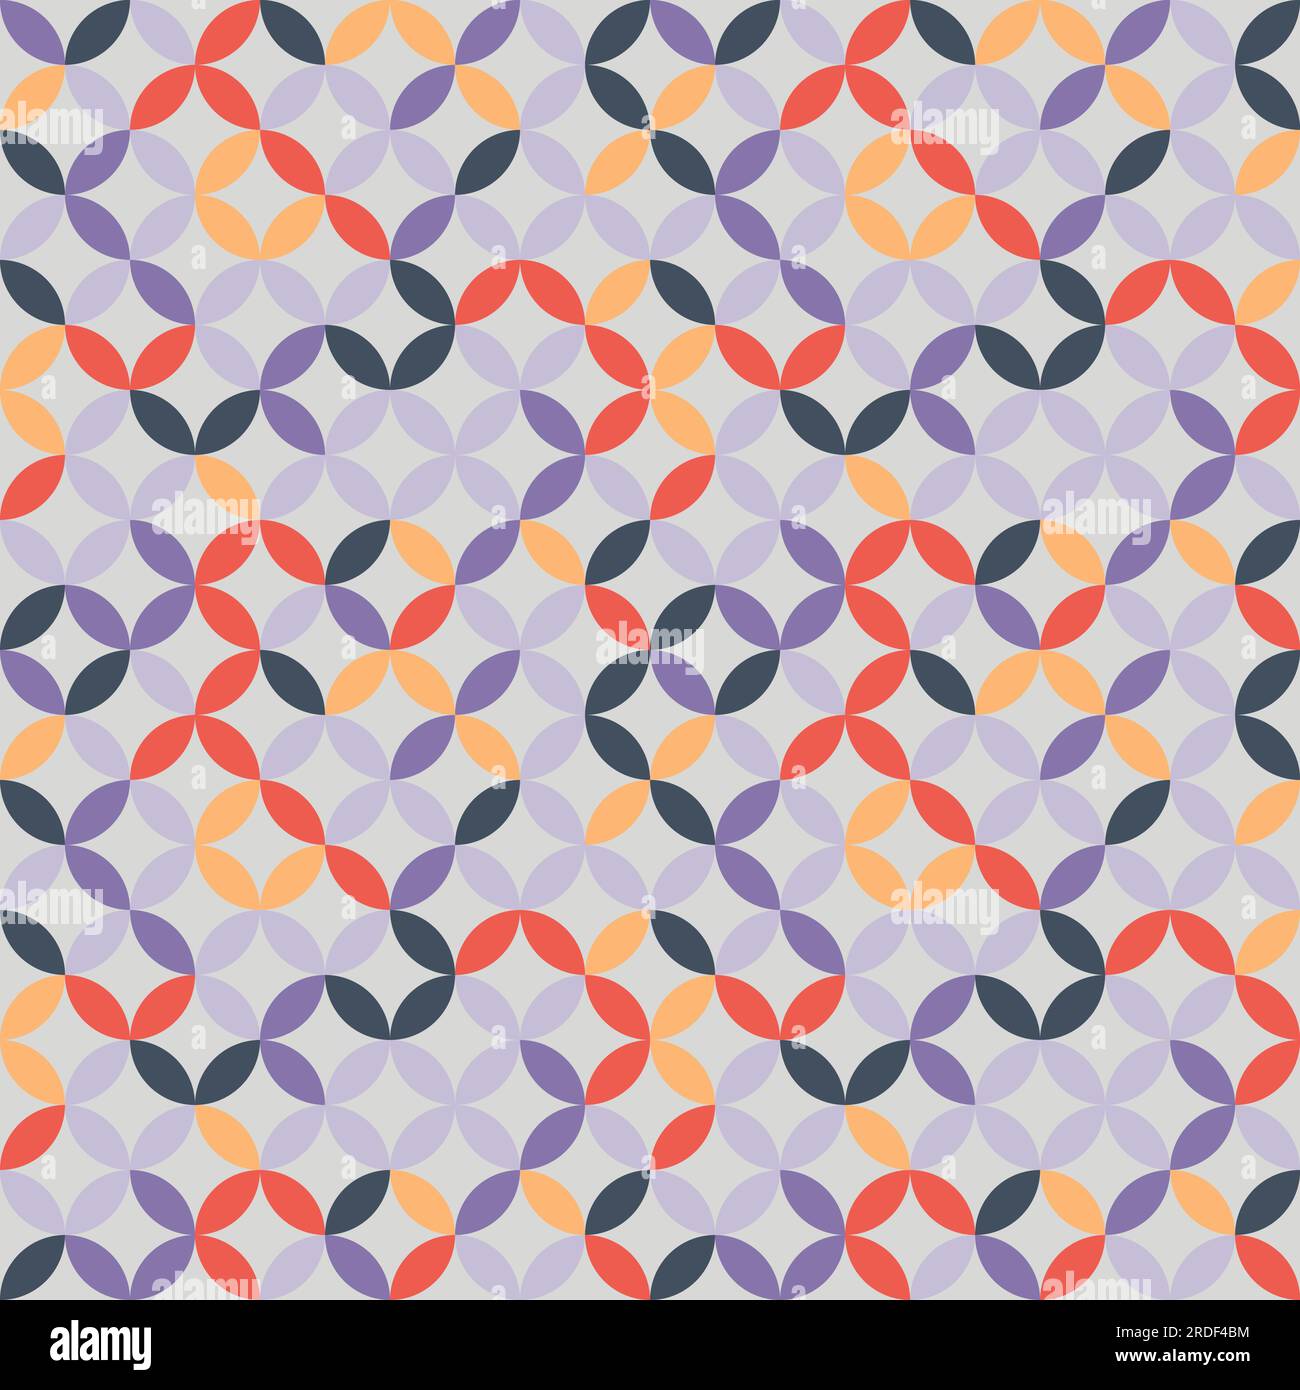 Violet and red geometric pattern. Overlapping circles and ovals abstract retro fashion texture. Seamless pattern. Stock Vector